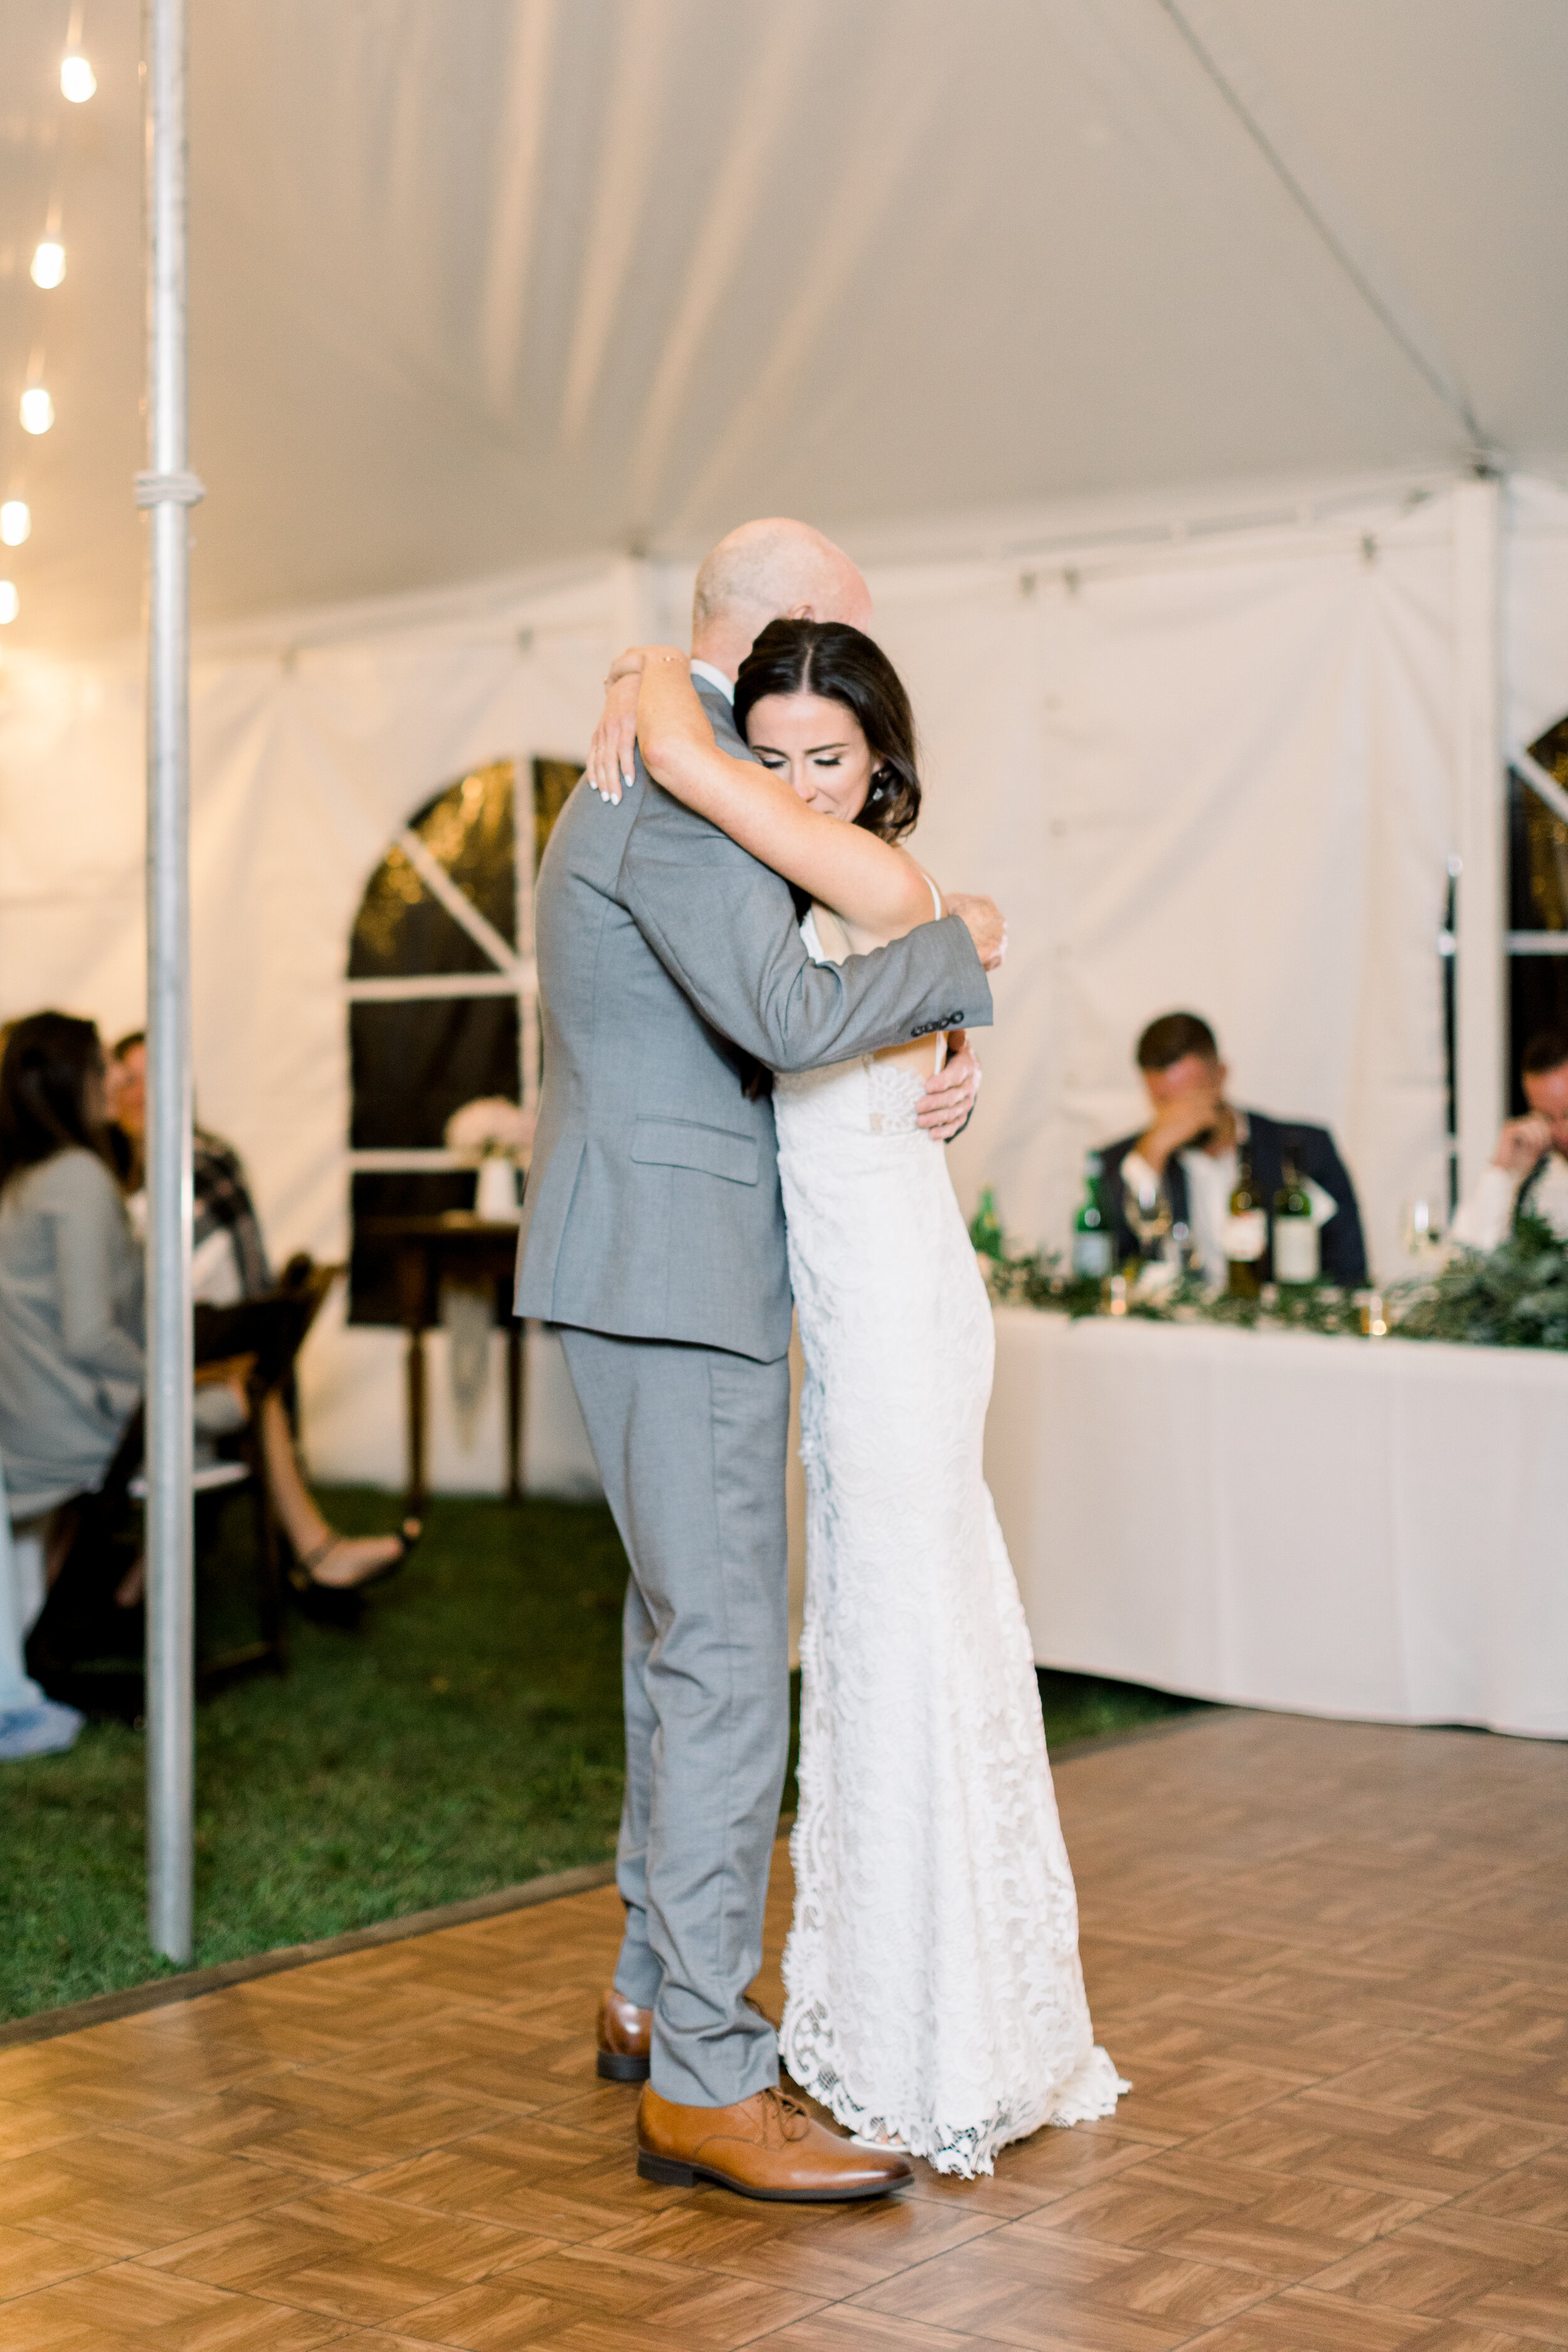  The bride and her father share a dance on the dance floor in this backyard wedding in Ottawa, Ontario captured by Chelsea Mason Photography. Father daughter dance wedding night dance floor white lace wedding dress details happy moment candid kinmoun